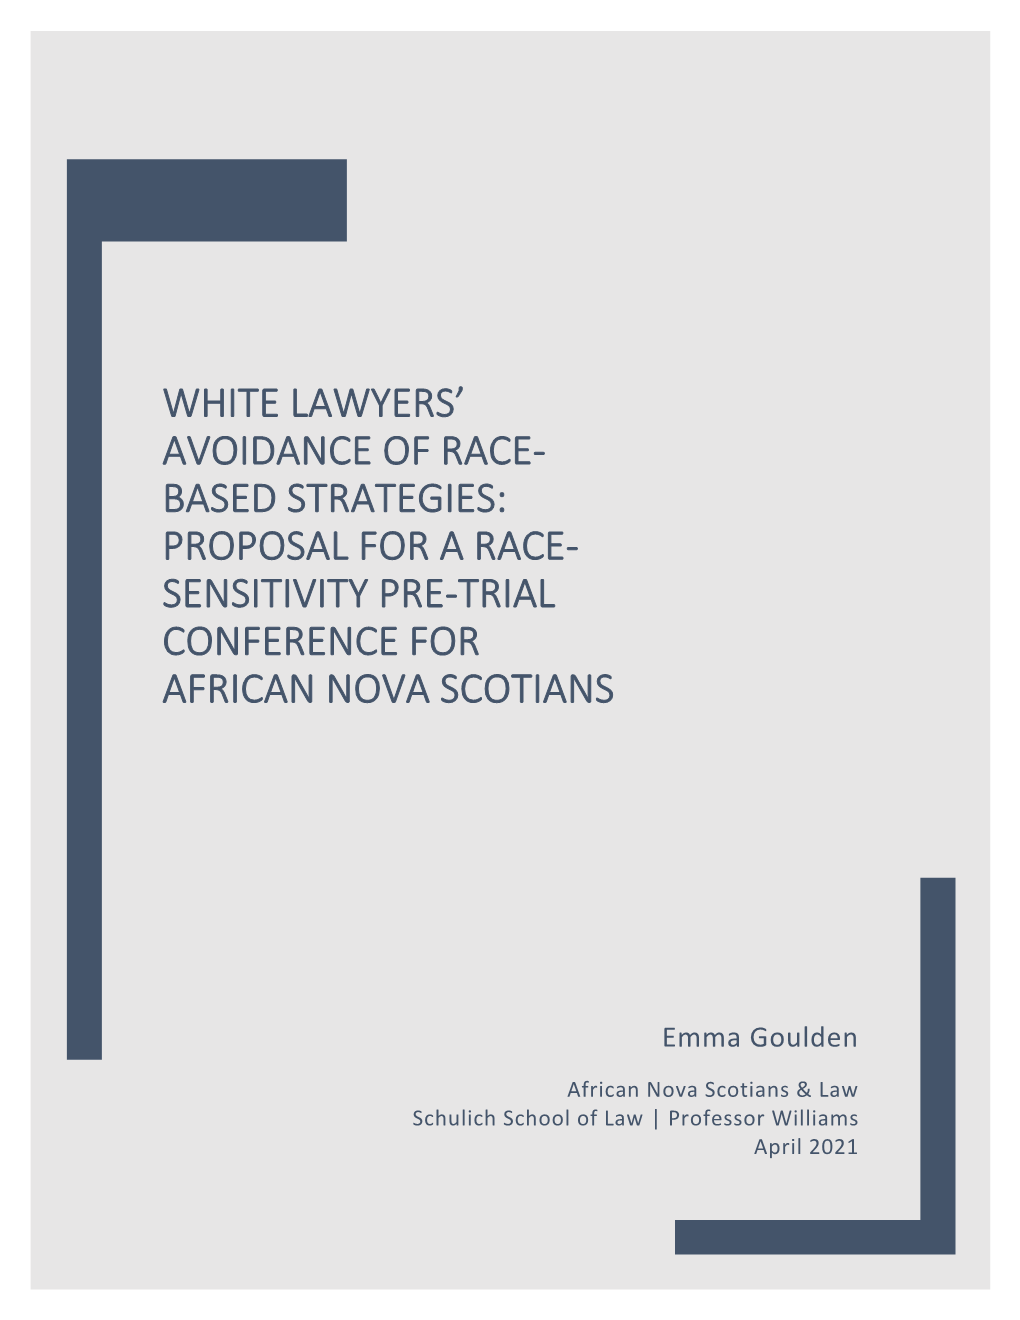 White Lawyers' Avoidance of Race-Based Strategies: Proposal For